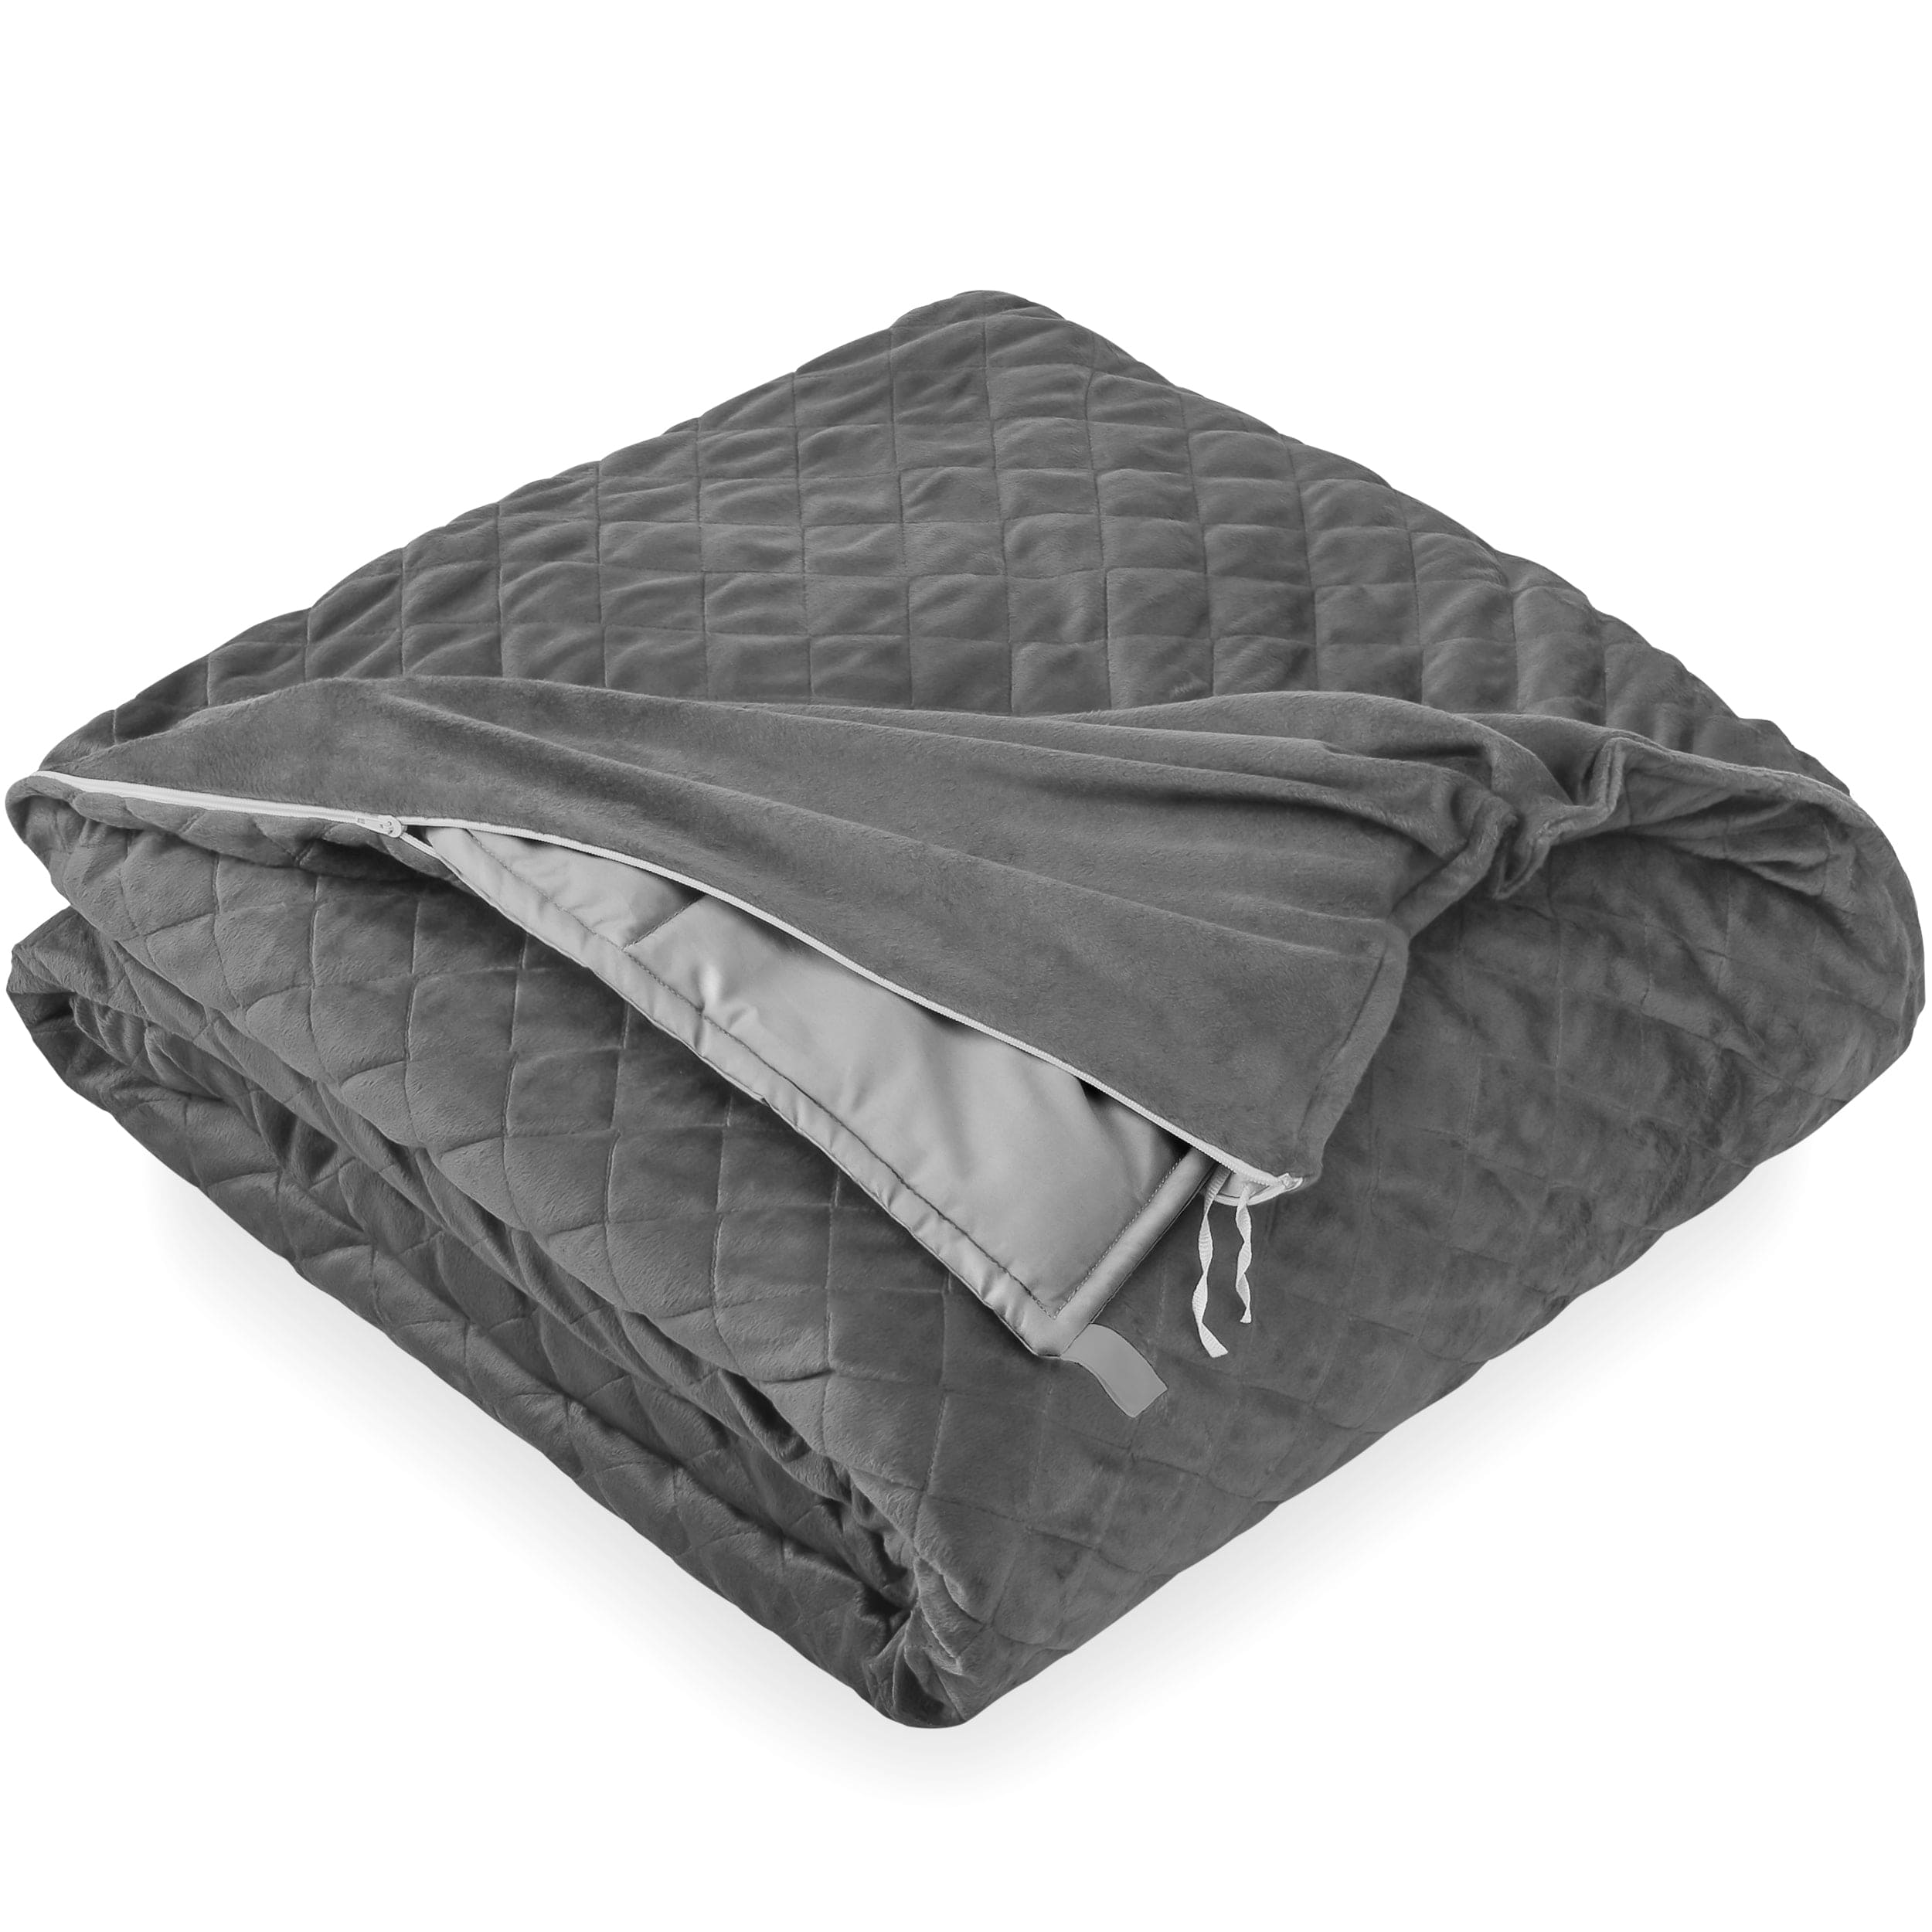 A grey weighted blanket is inside a grey cover and the blanket is slightly pulled out. The blanket is folded.